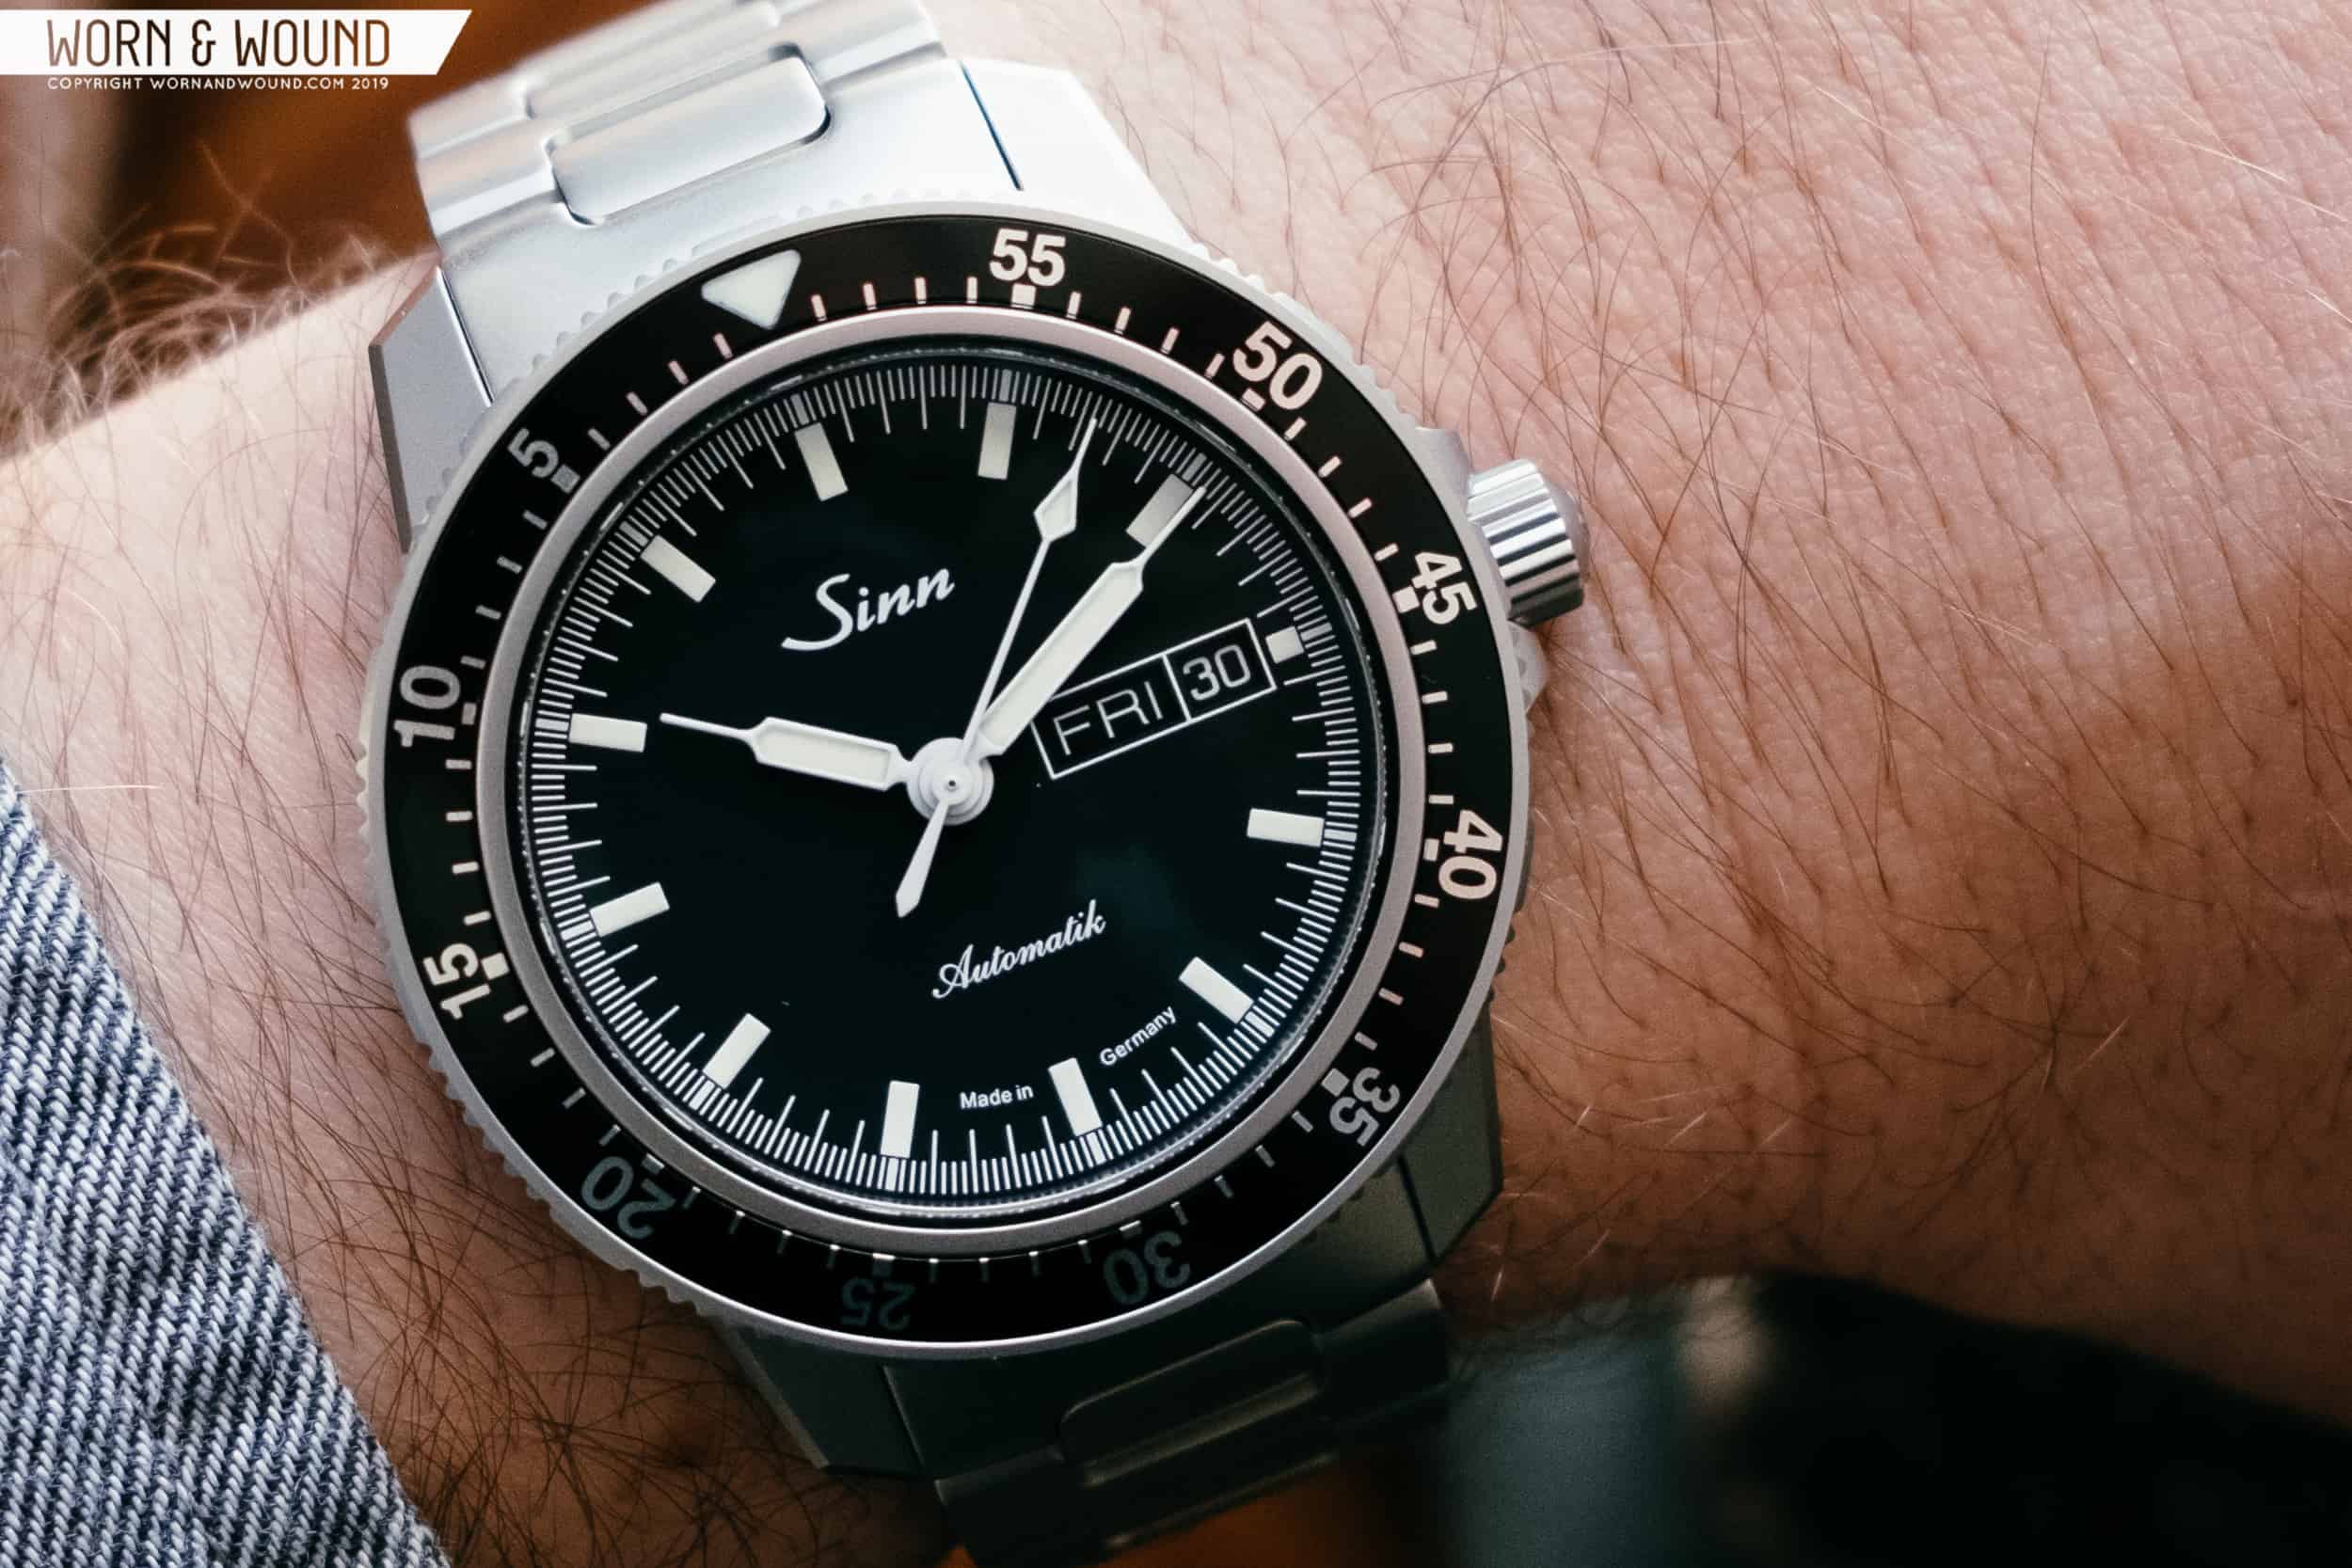 SINN 104 REVIEW 14 - Recapping 2019: Our 10 Favorite Watch Reviews of the Year